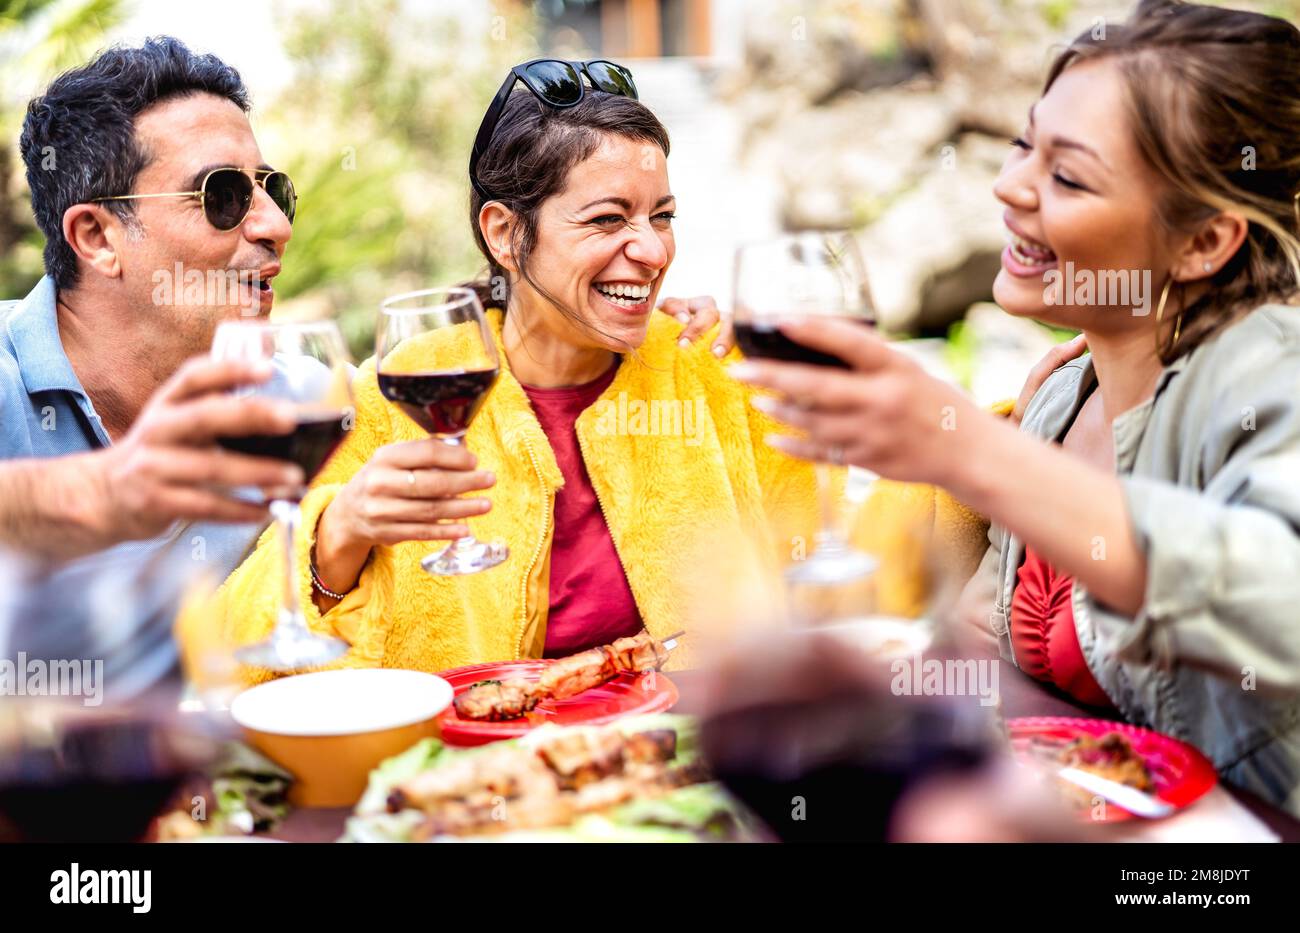 Happy friends on genuine mood drinking red wine at pic nic party - Mixed age range people having fun together at restaurant winery patio out side Stock Photo